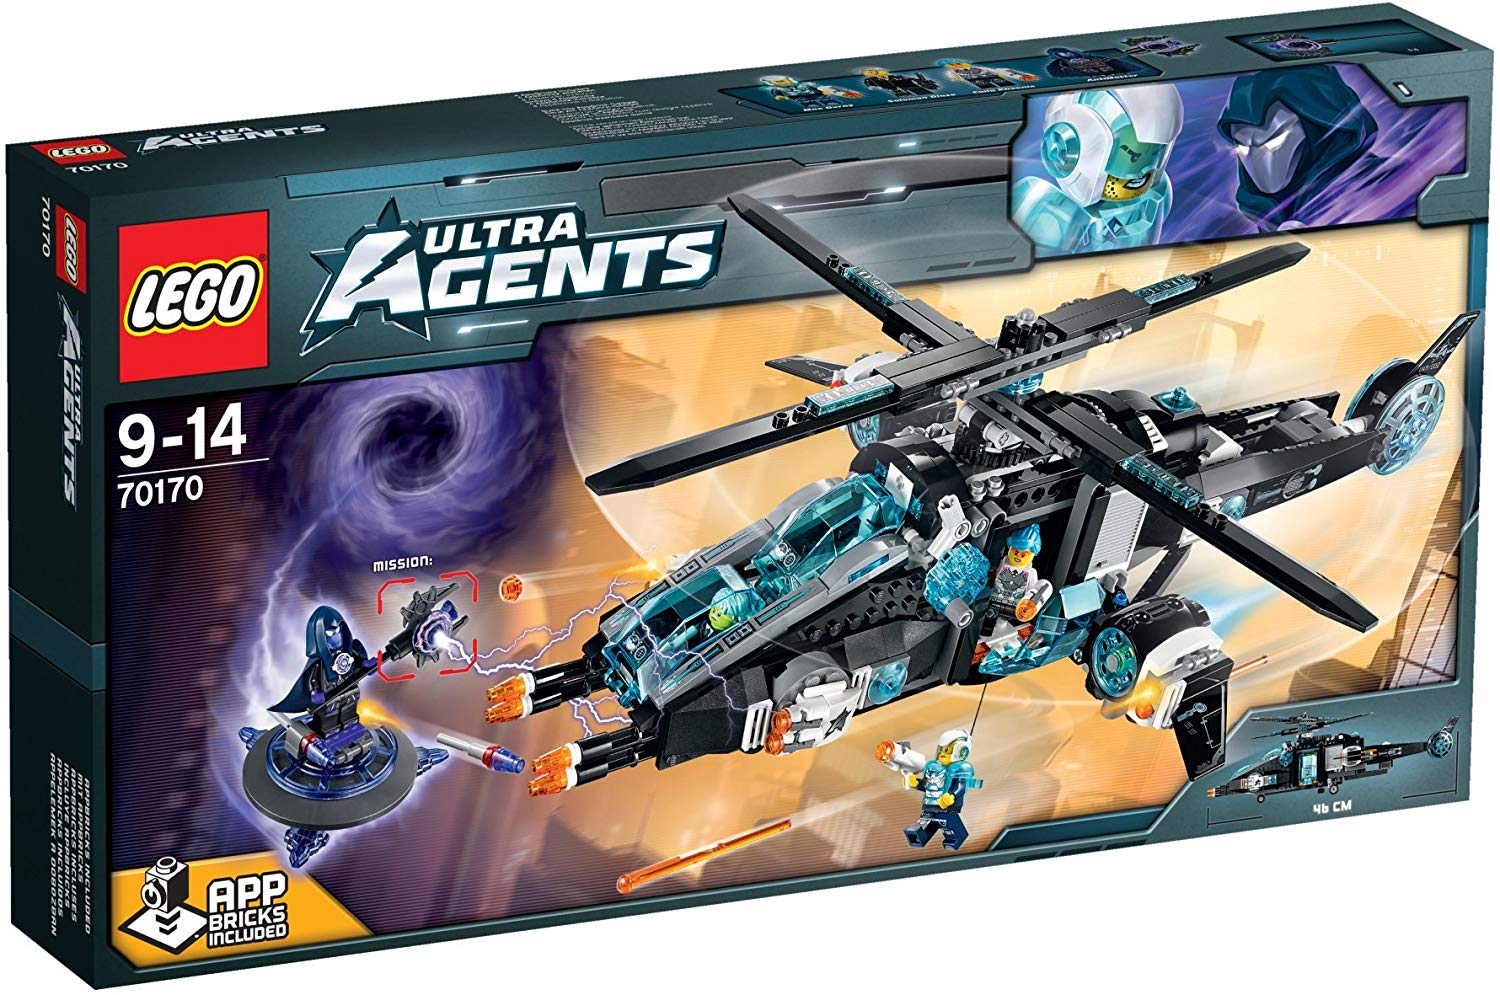 Lego Agents 70170: Ultracopter Vs. Antimatter